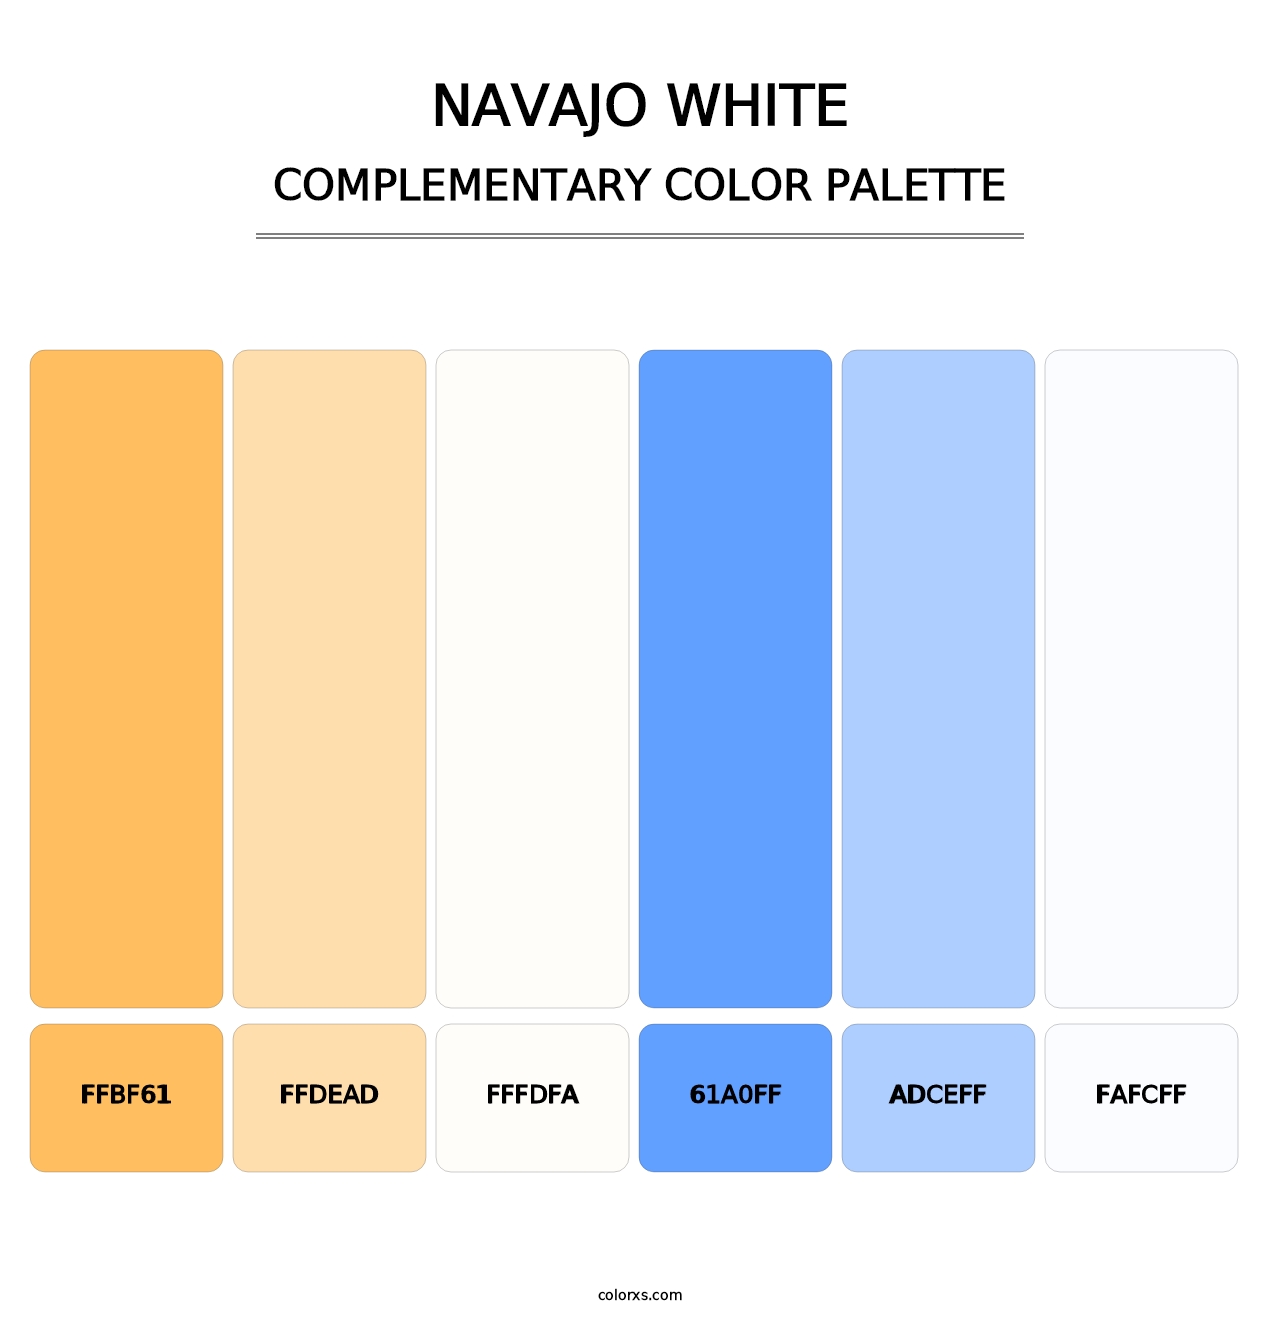 Navajo White - Complementary Color Palette